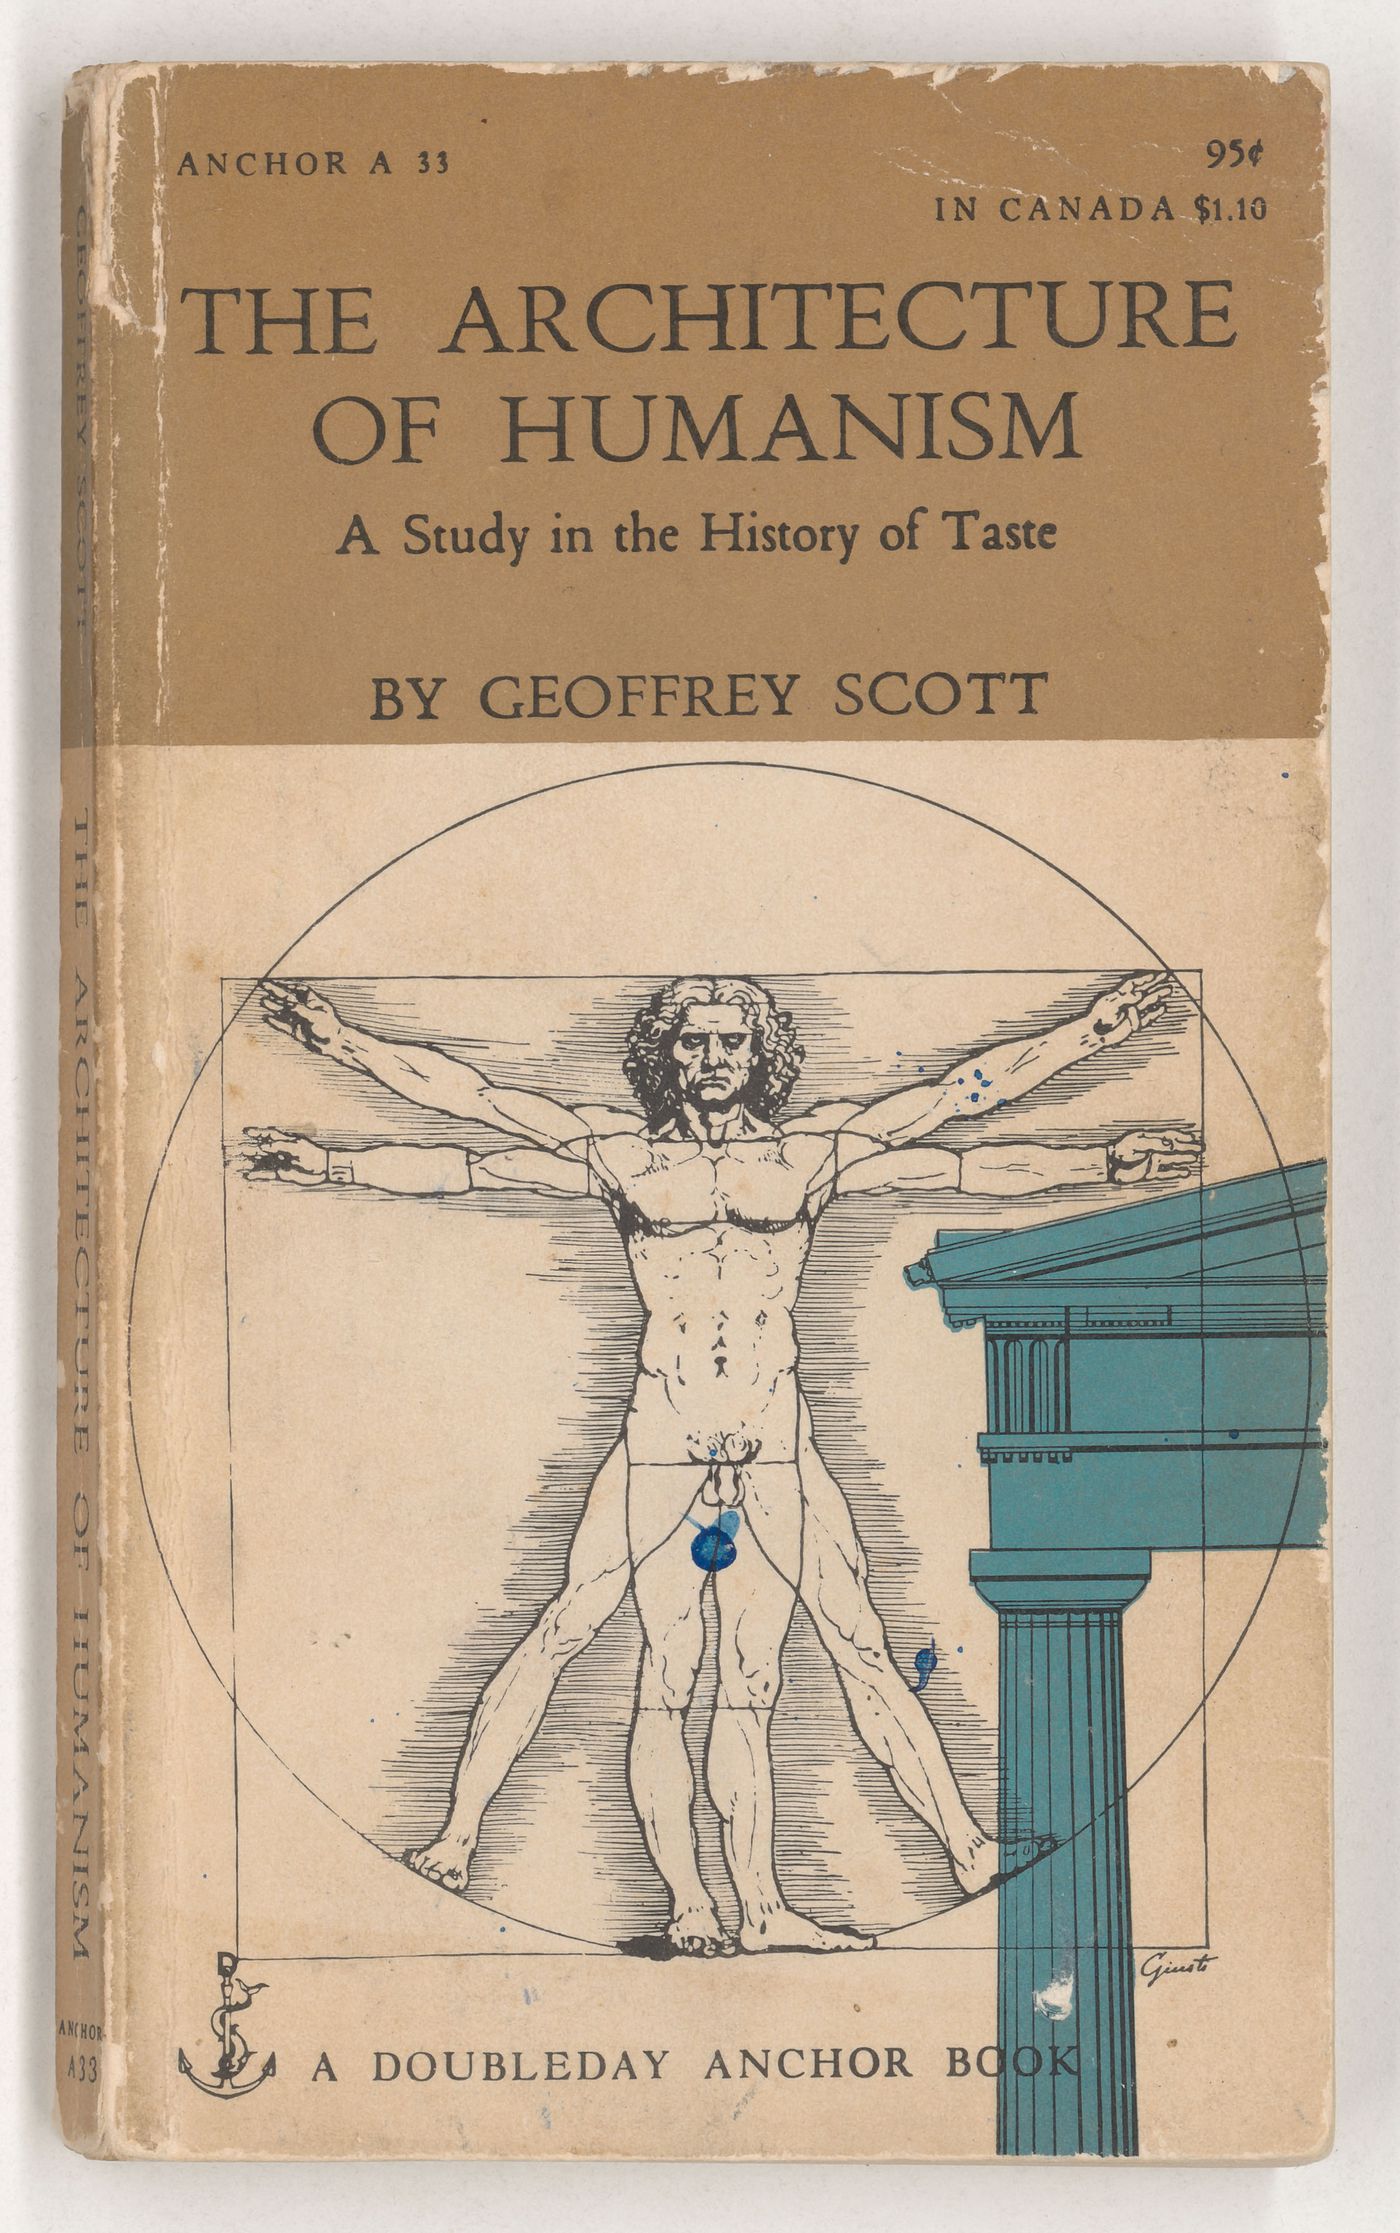 The Architecture of Humanism: A Study in the History of Taste